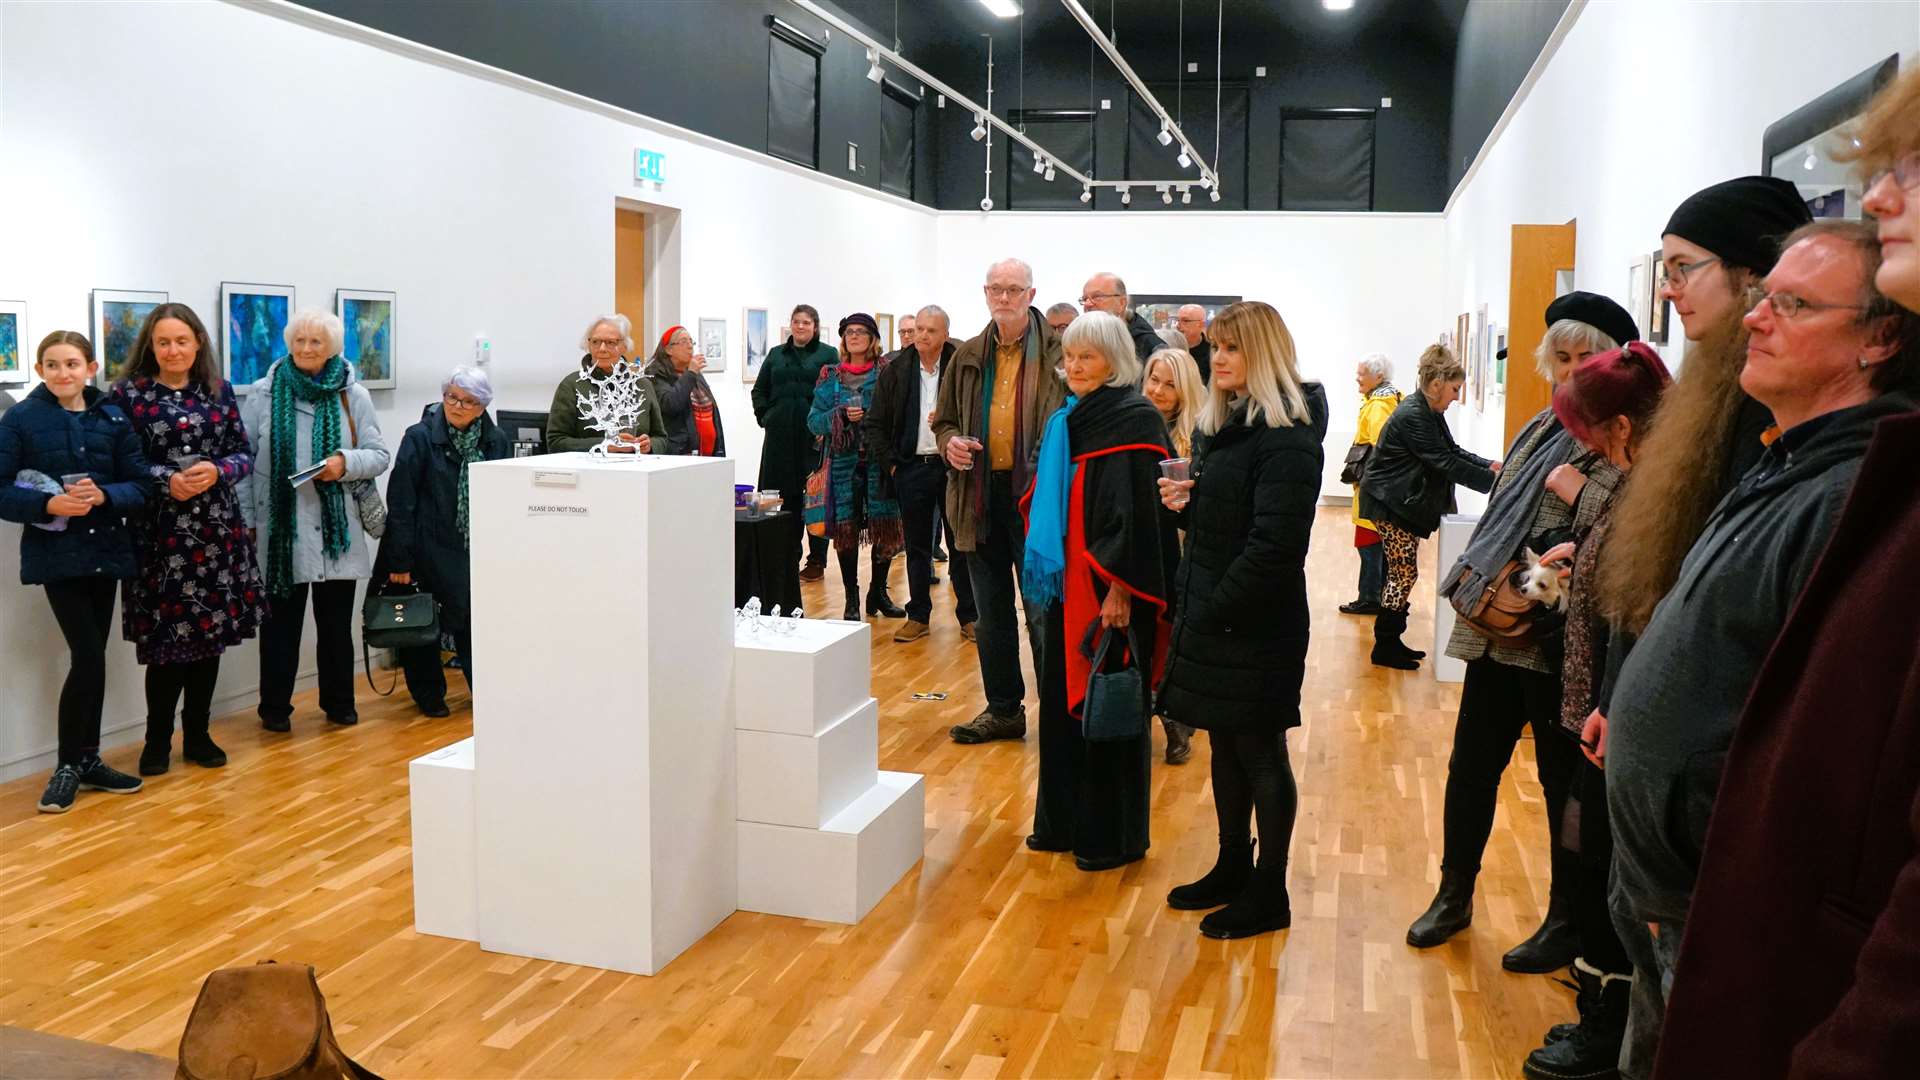 Over 50 people turned up for the event at Thurso Art Gallery. Picture: DGS